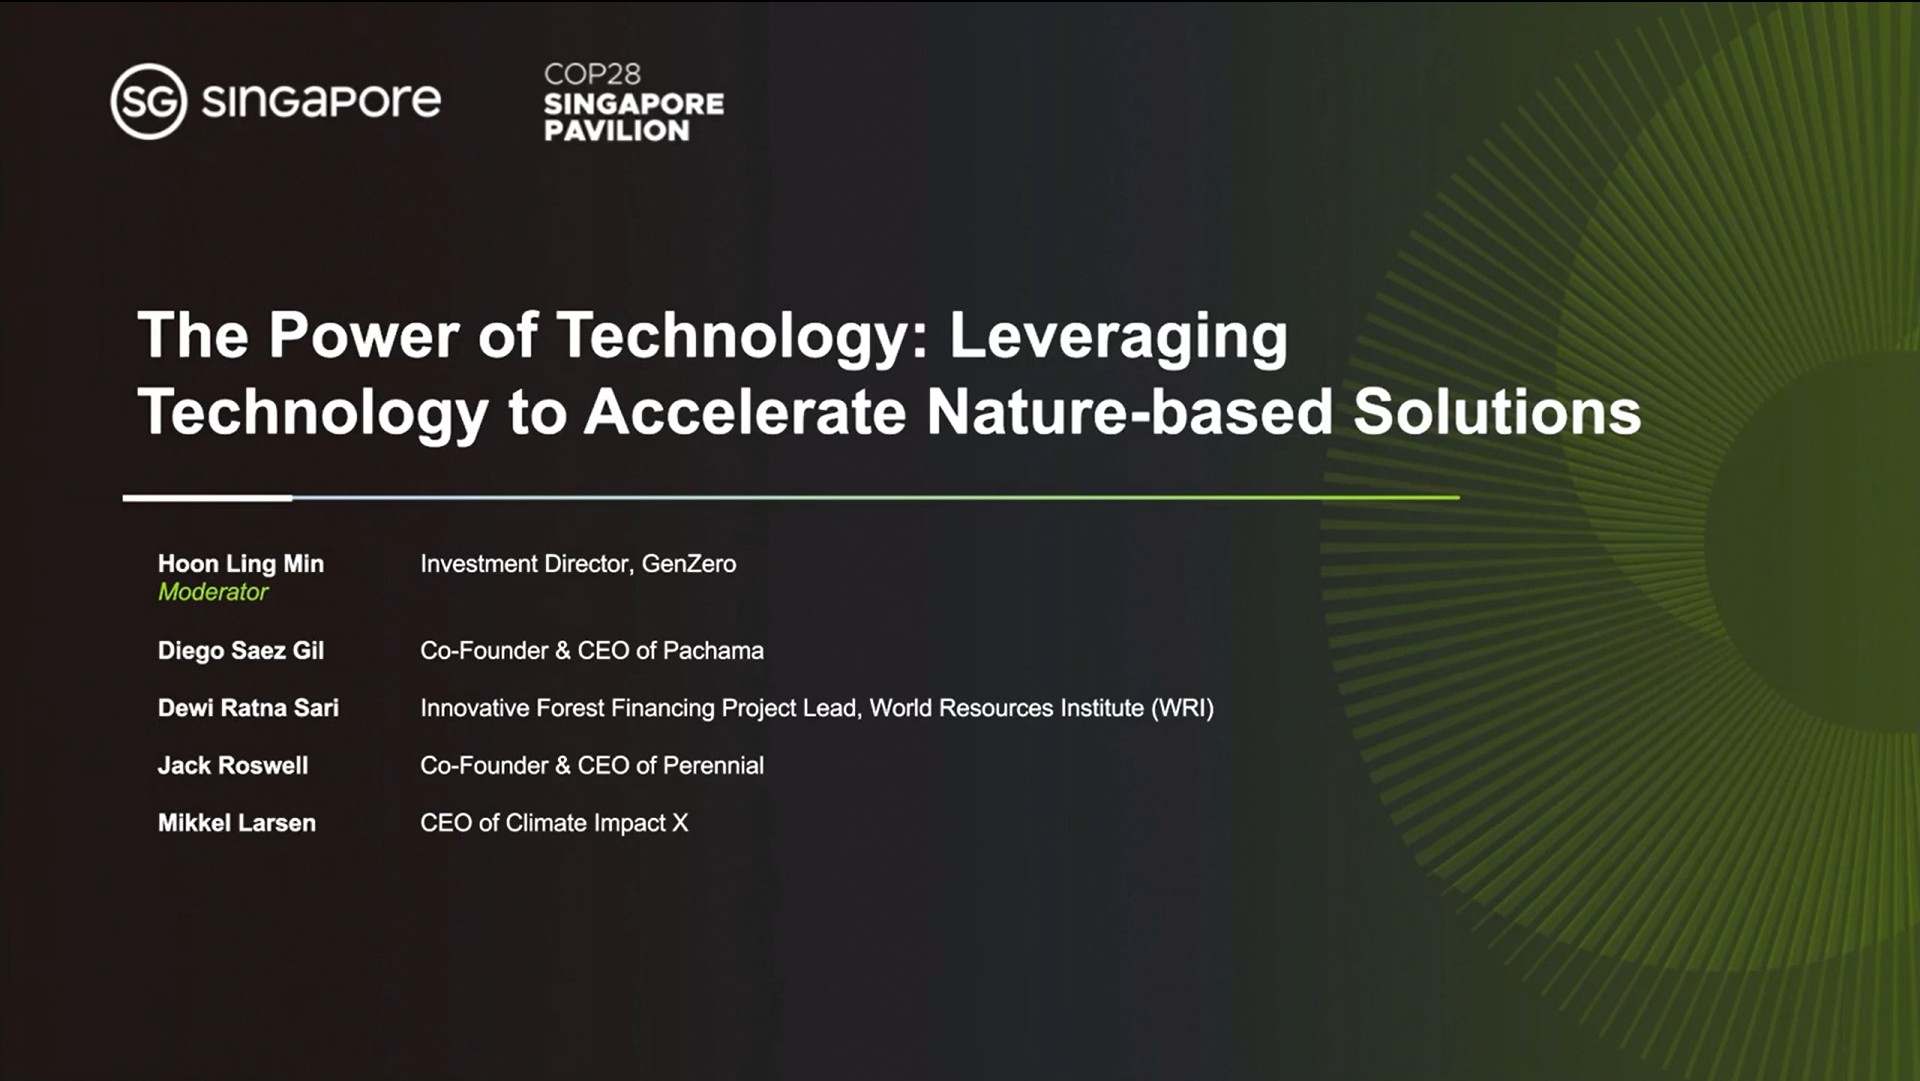 The Power of Technology: Leveraging Technology to Accelerate Nature-based Solutions